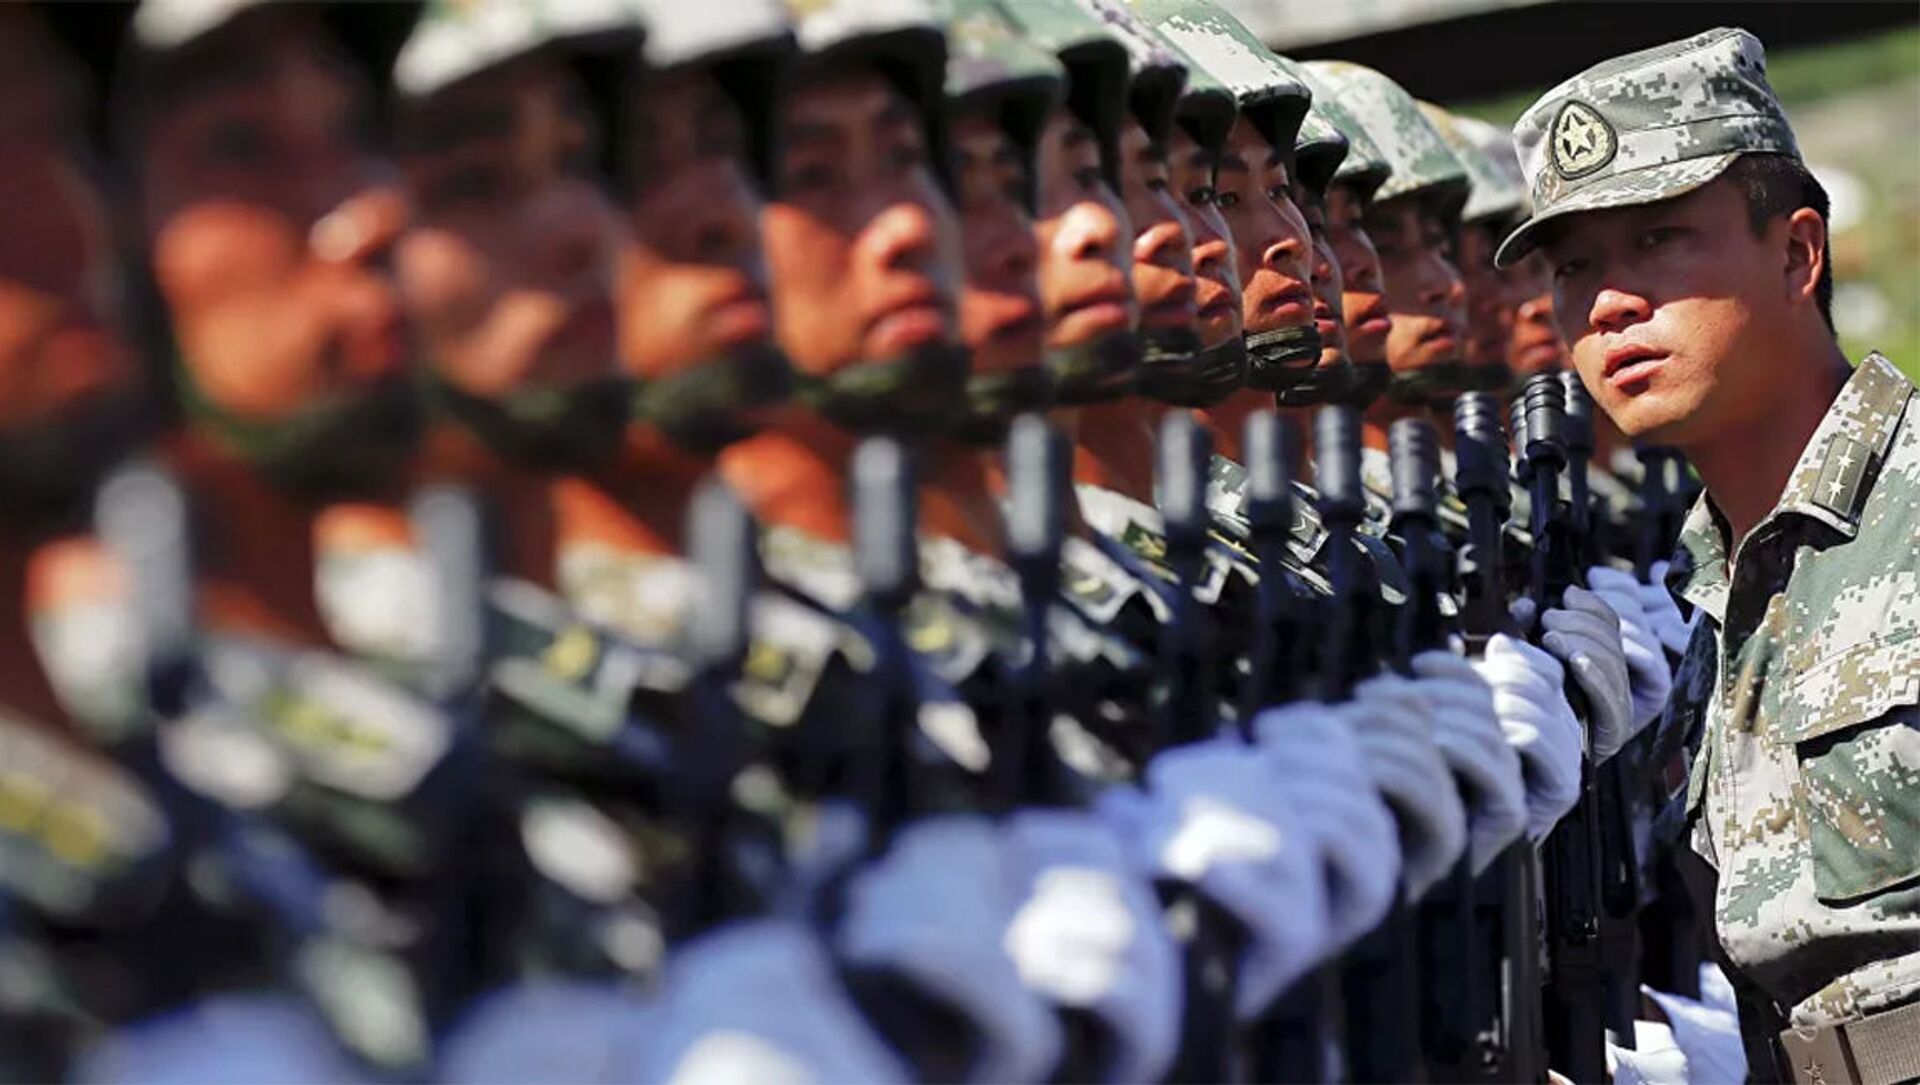 An officer gives instructions as soldiers of China's People's Liberation Army form a line during a training session for a military parade to mark the 70th anniversary of the end of World War Two, at a military base in Beijing, China, August 22, 2015 - 俄罗斯卫星通讯社, 1920, 07.06.2021